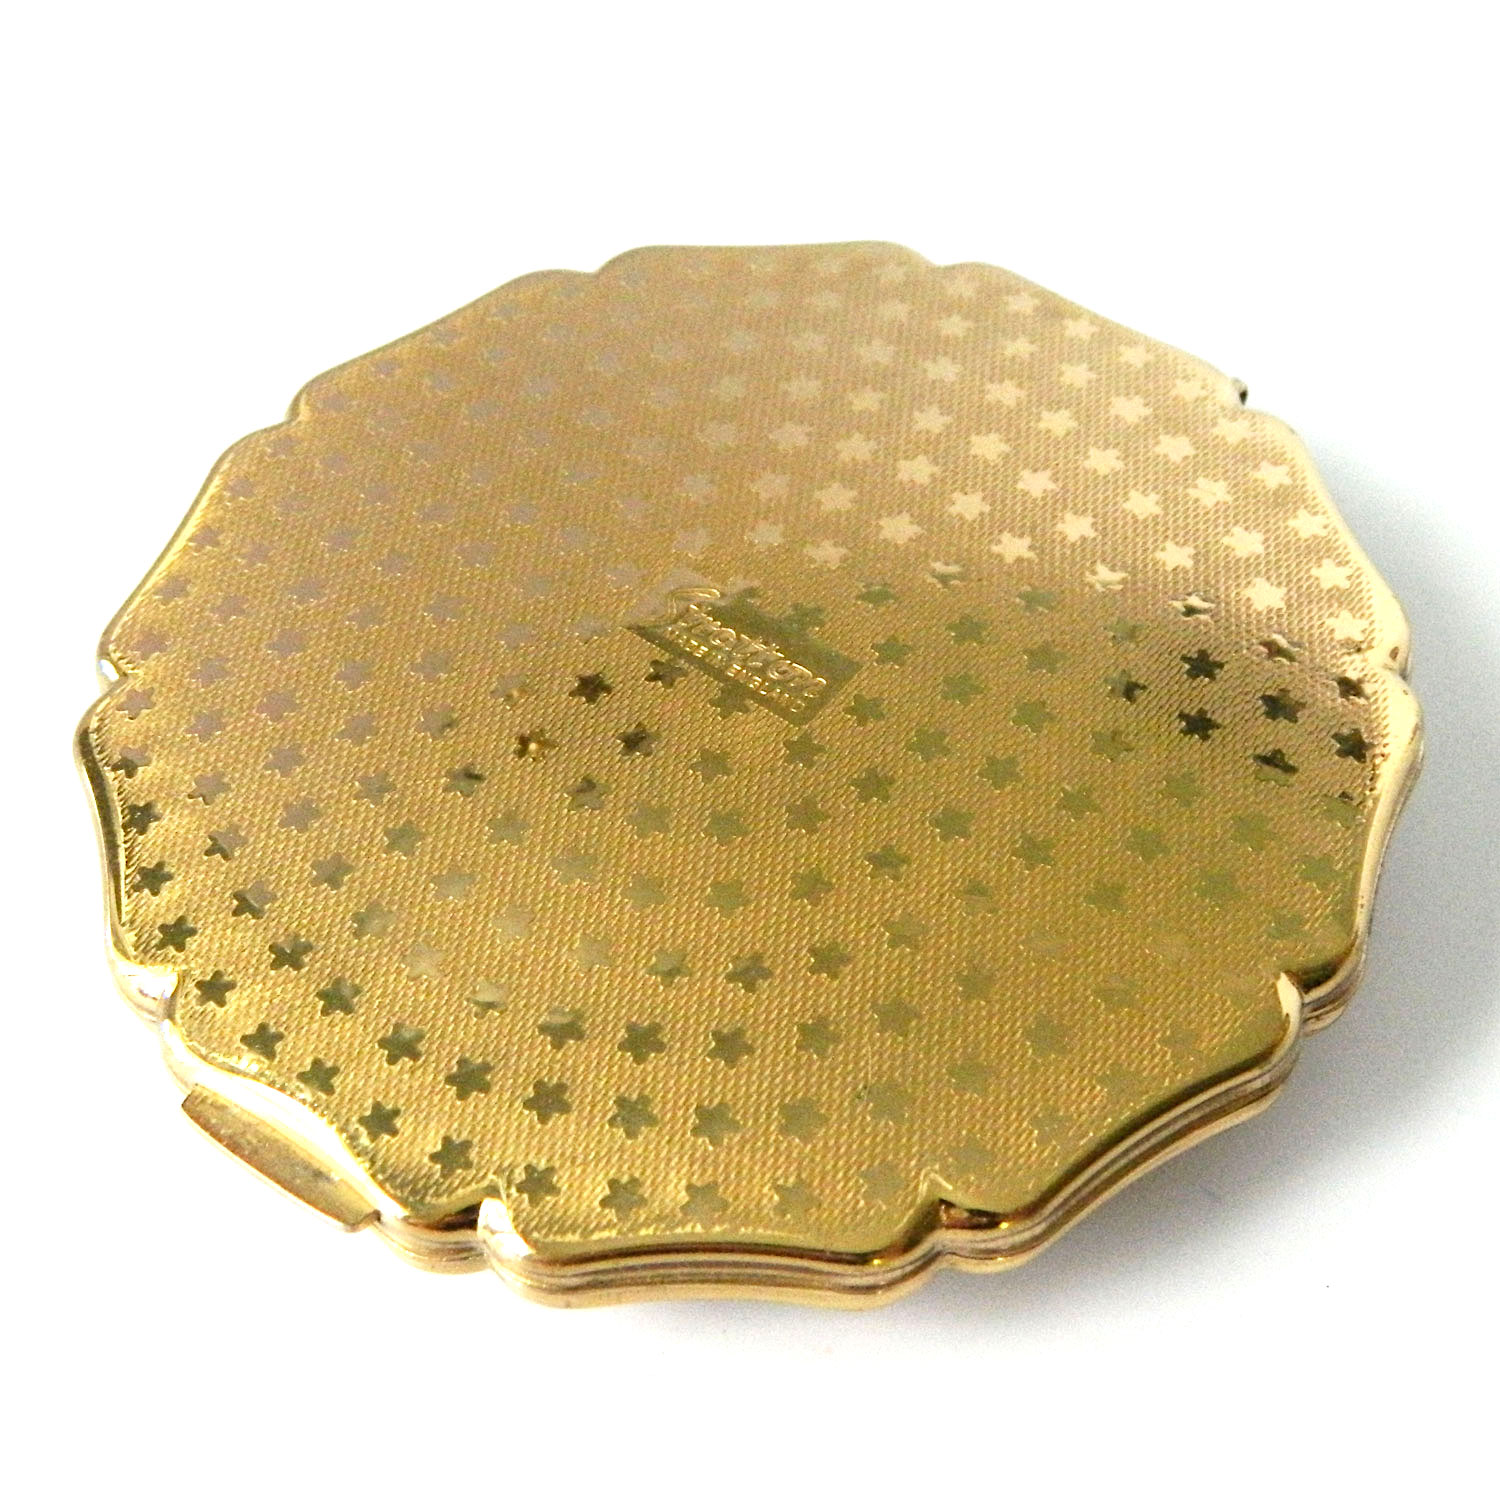 Vintage Stratton compact